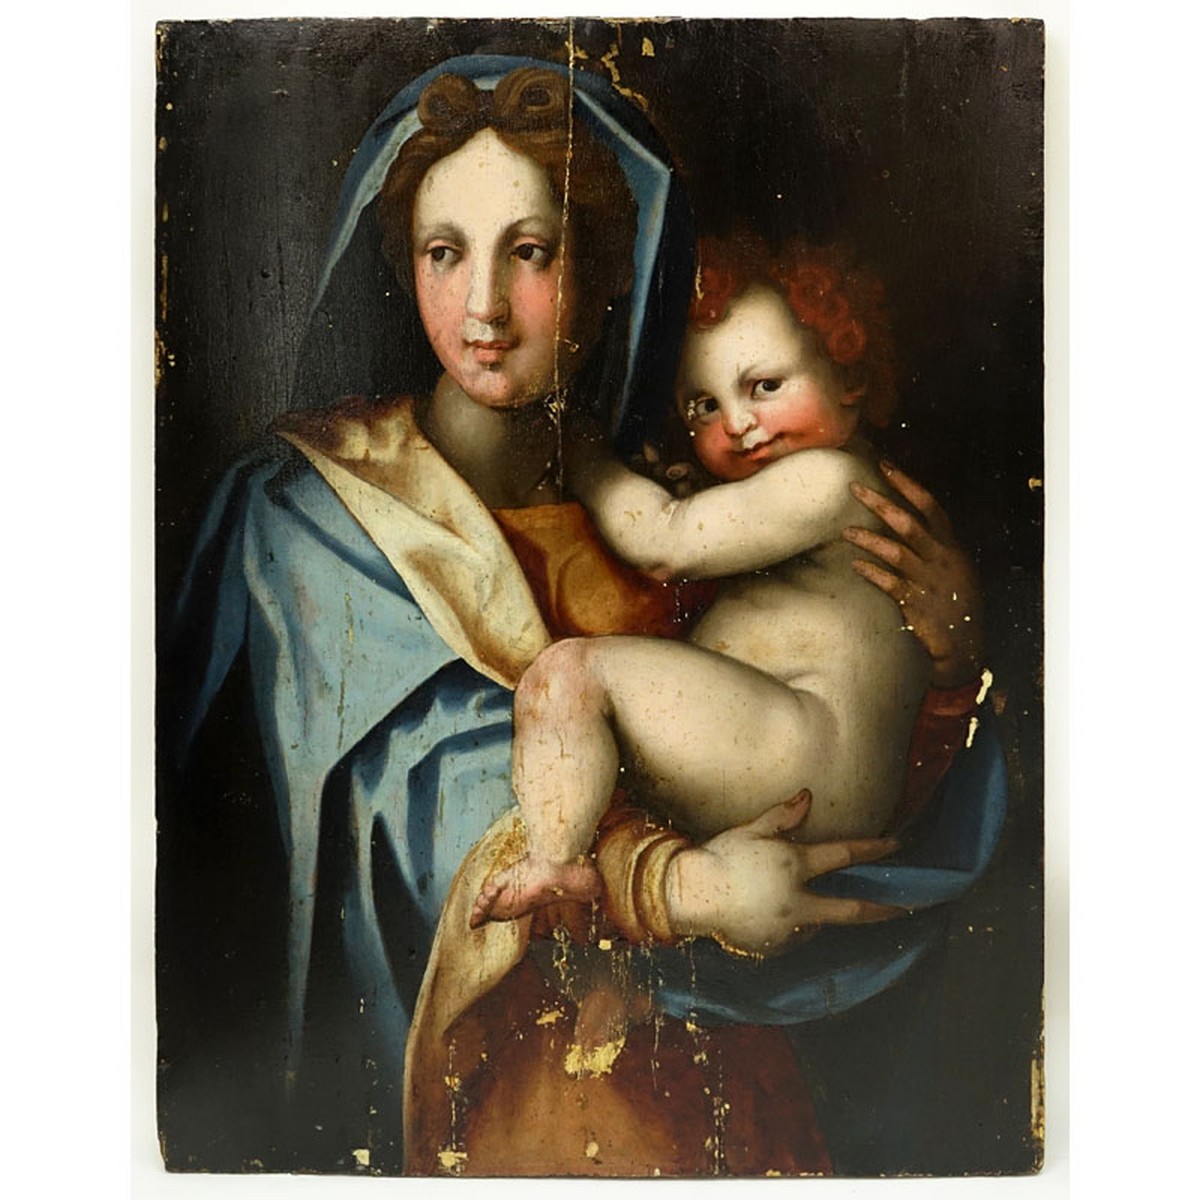 Large 16/17th Century Florentine School Oil on Panel, "Madonna and Child". Conserved condition, craquelure, varnish throughout, paint loss, hairline to center under the varnish.